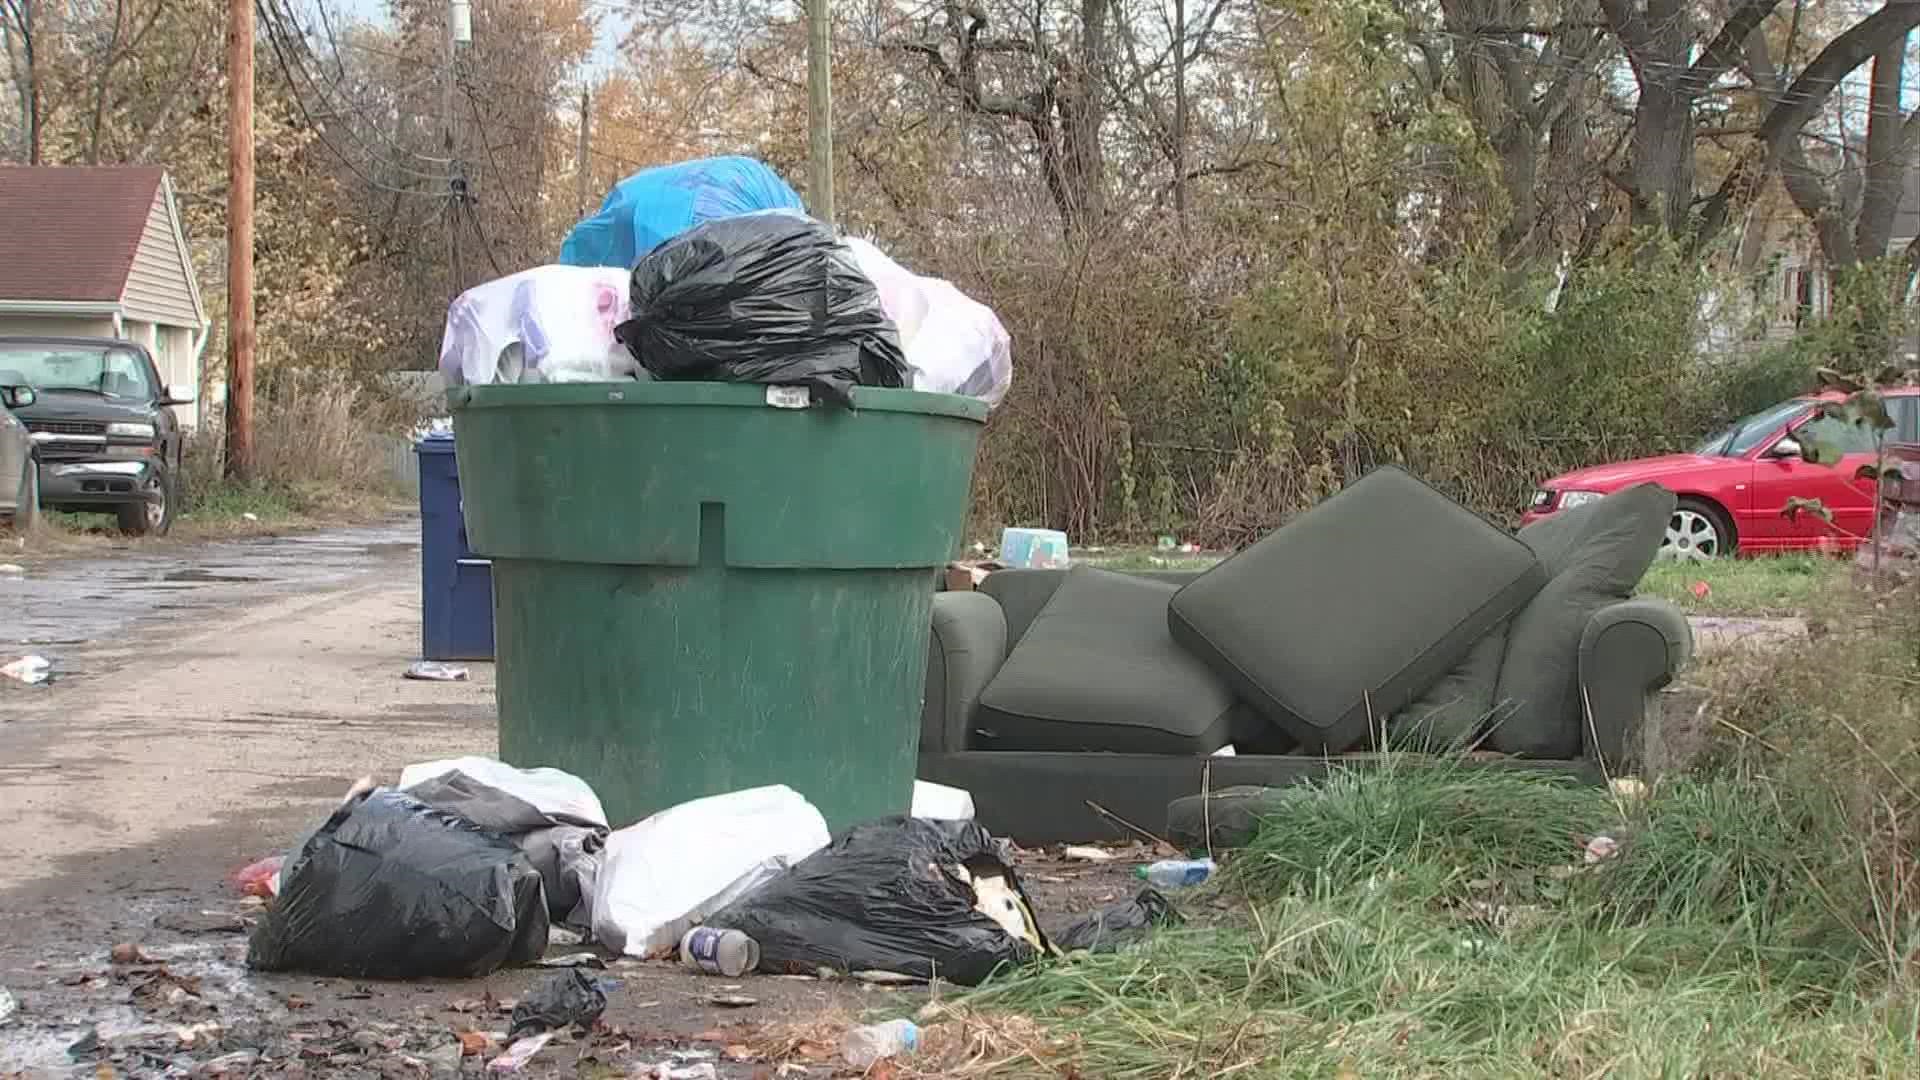 The city said people will illegally fill the 300-gallon dumpsters seen in public, which leads to problems when the garbage spills over.